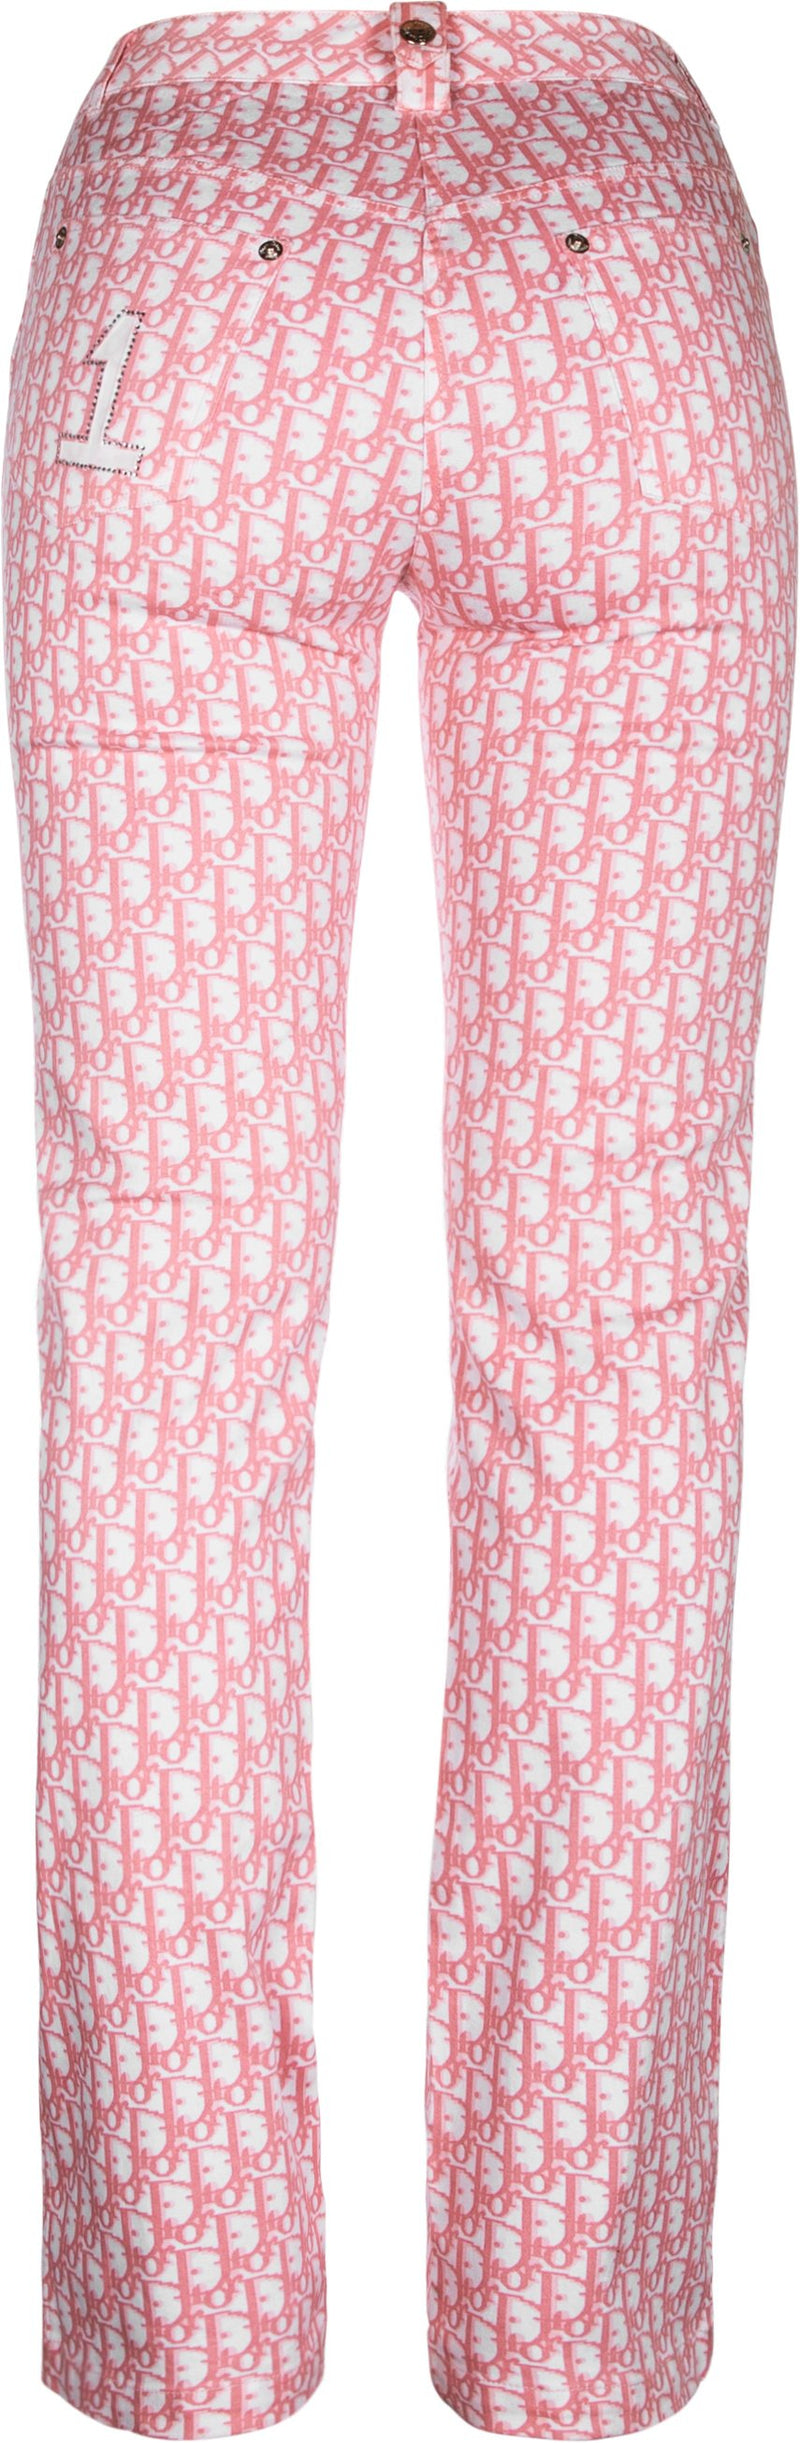 Christian Dior Diorissimo Girly Embellished Jeans